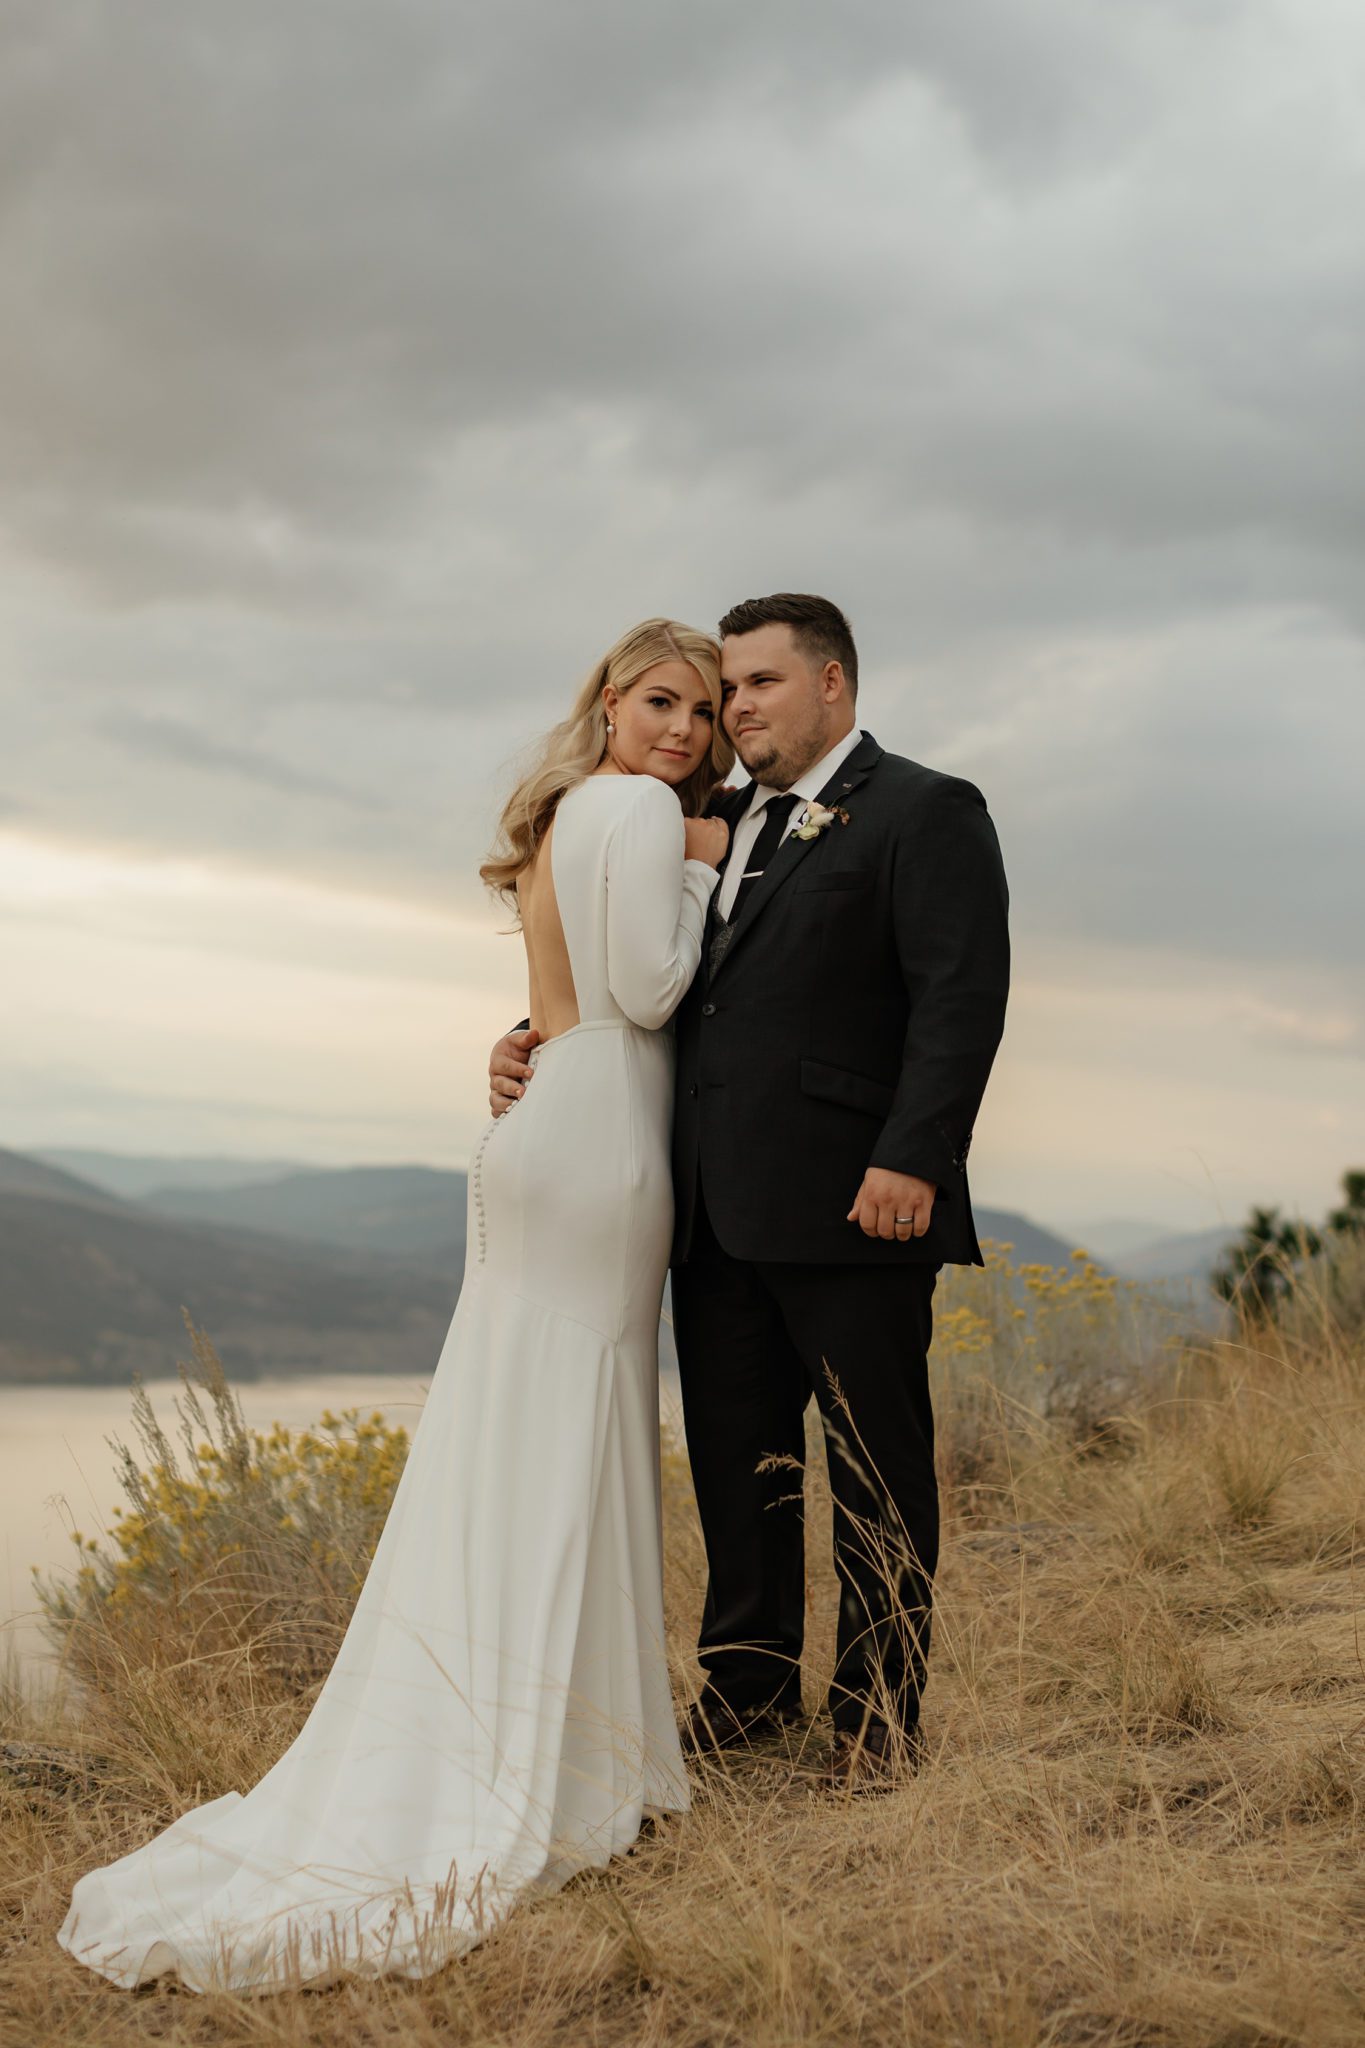 Romantic portrait of bride and groom on their wedding day overlooking the Okanagan Valley